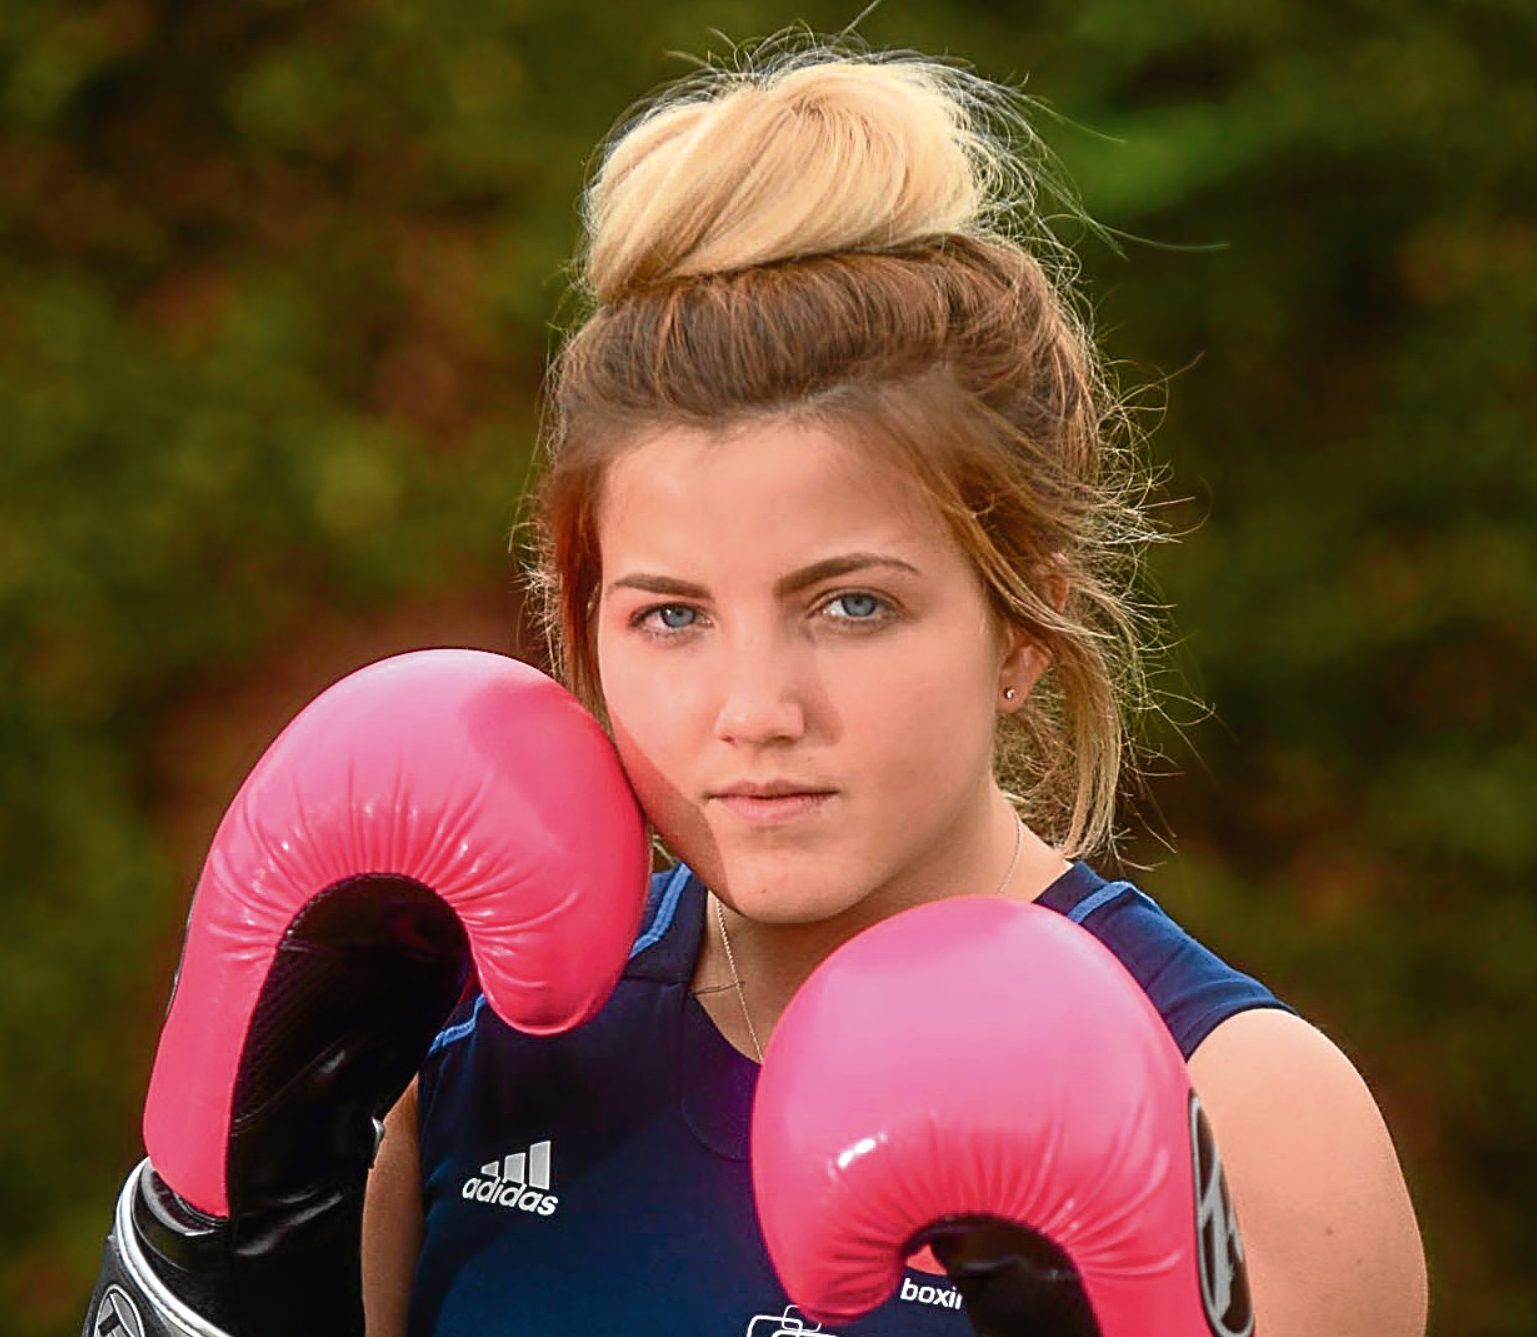 17-year-old Rothes girl, Megan Gordon, a member of Elgin Amateur Boxing Club, who has been picked to represent Scotland at the Commonwealth Youth Games in the Bahamas in July.  

Photo by
Michael Traill						
9 South Road
Rhynie
Huntly
AB54 4GA

Contact numbers
Mob	07739 38 4792
Home	01464 861425